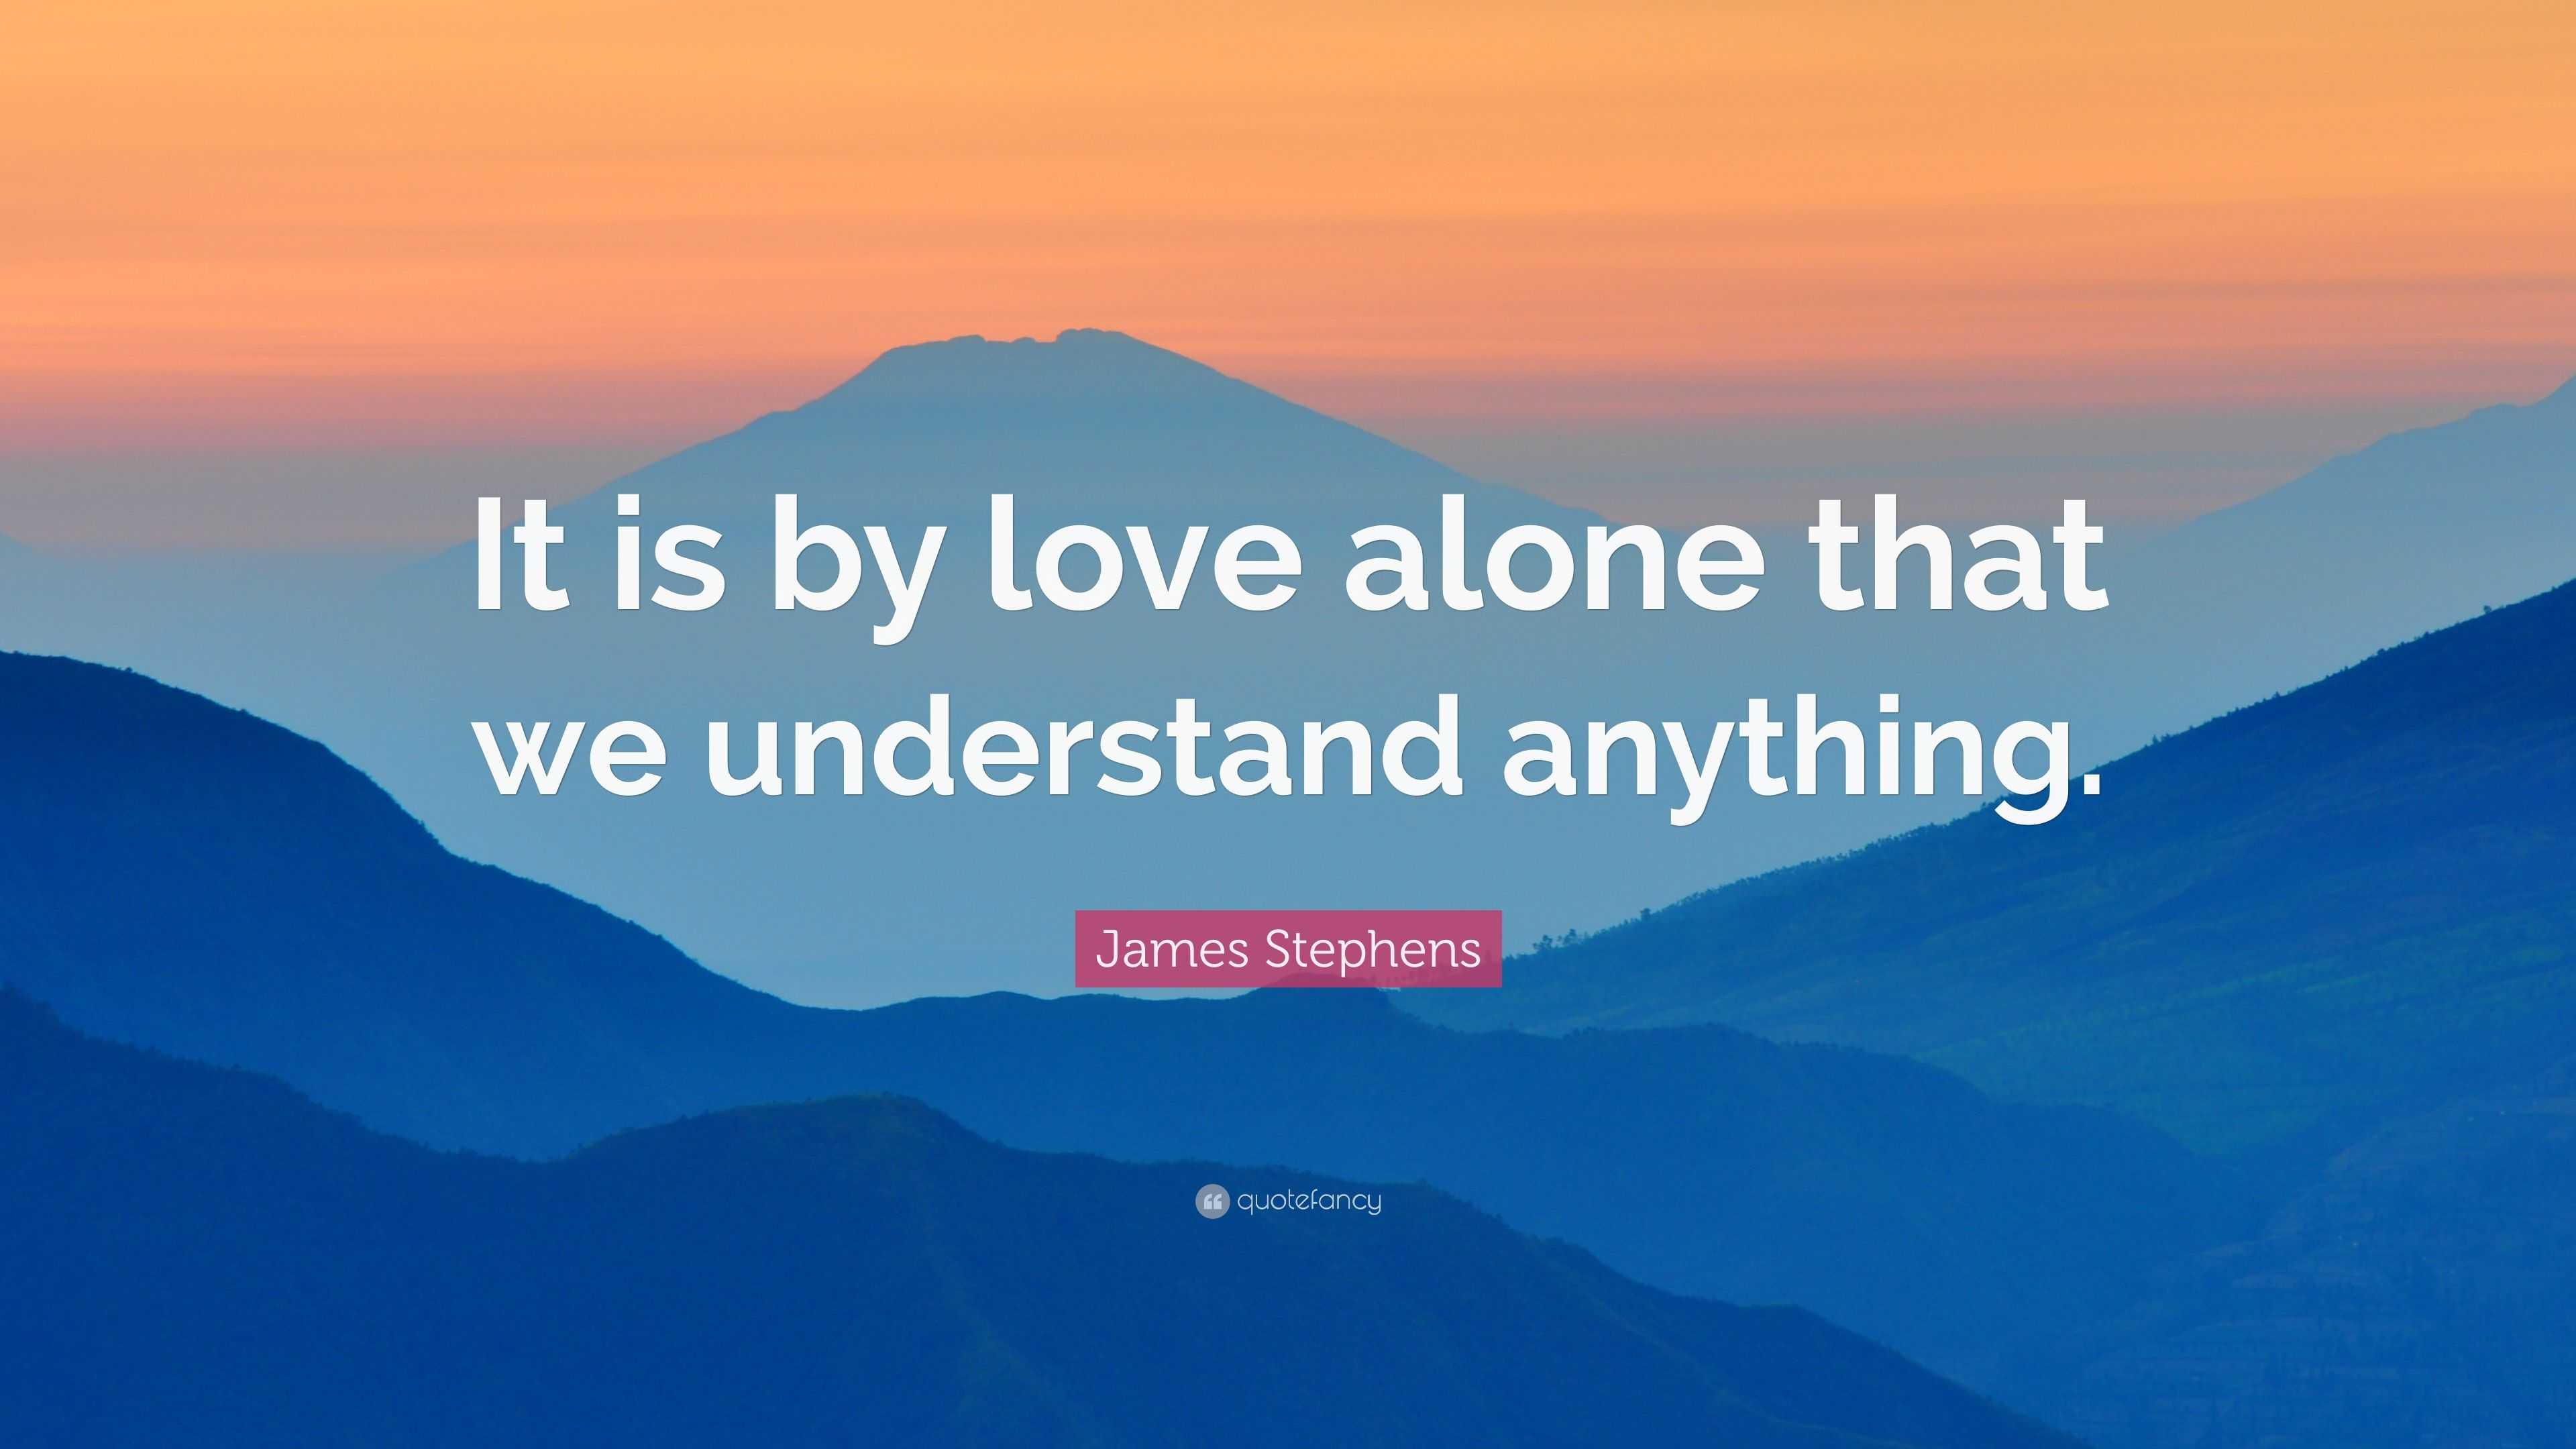 James Stephens Quote: “It is by love alone that we understand anything.”